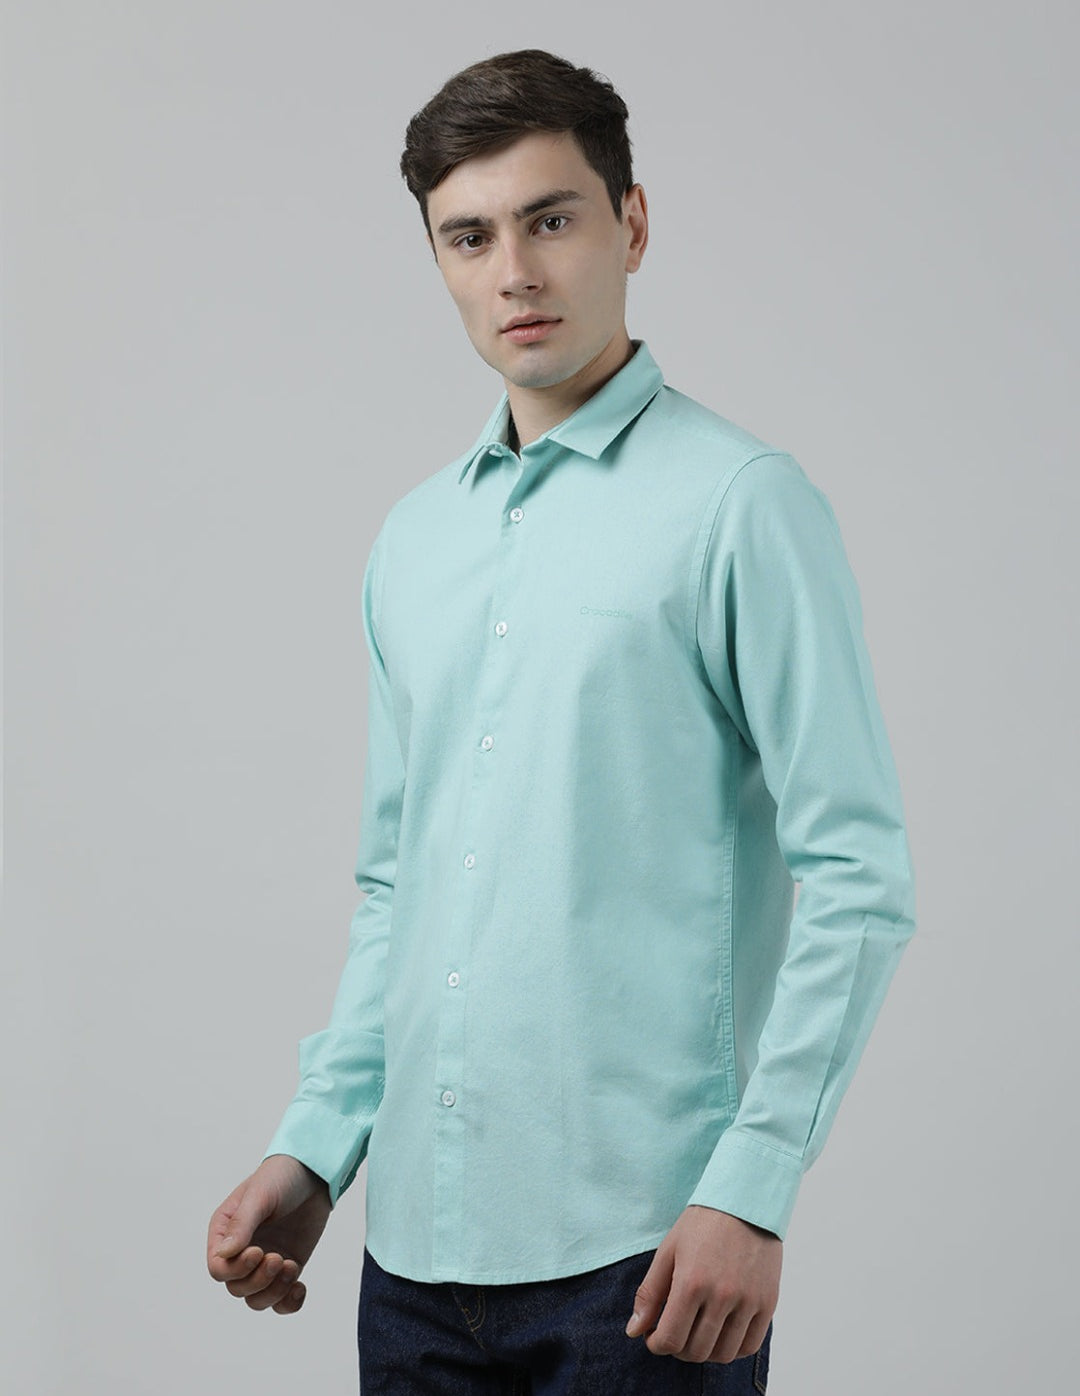 Crocodile Casual Full Sleeve Slim Fit Printed Shirt Green with Collar for Men